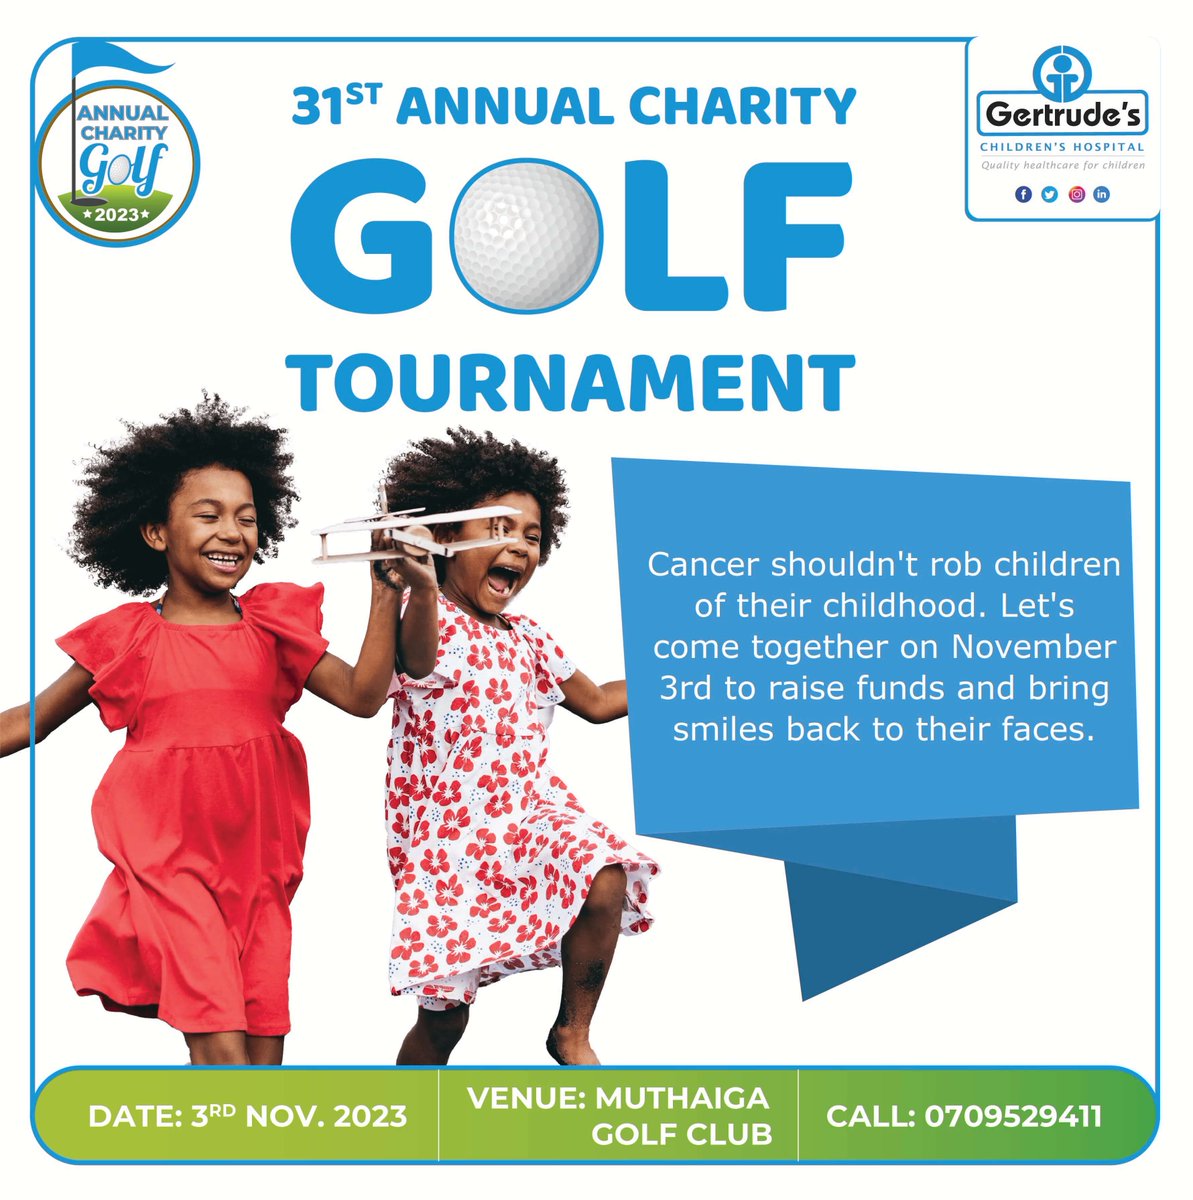 The strength of a child facing cancer is immeasurable. Let's play for their smiles, their dreams, and their futures at the Gertrude’s Hospital Foundation Golf Tournament. ⛳🎗️ #GertrudesGolfTournament2023 #GertrudesKe #UlizaDaktari